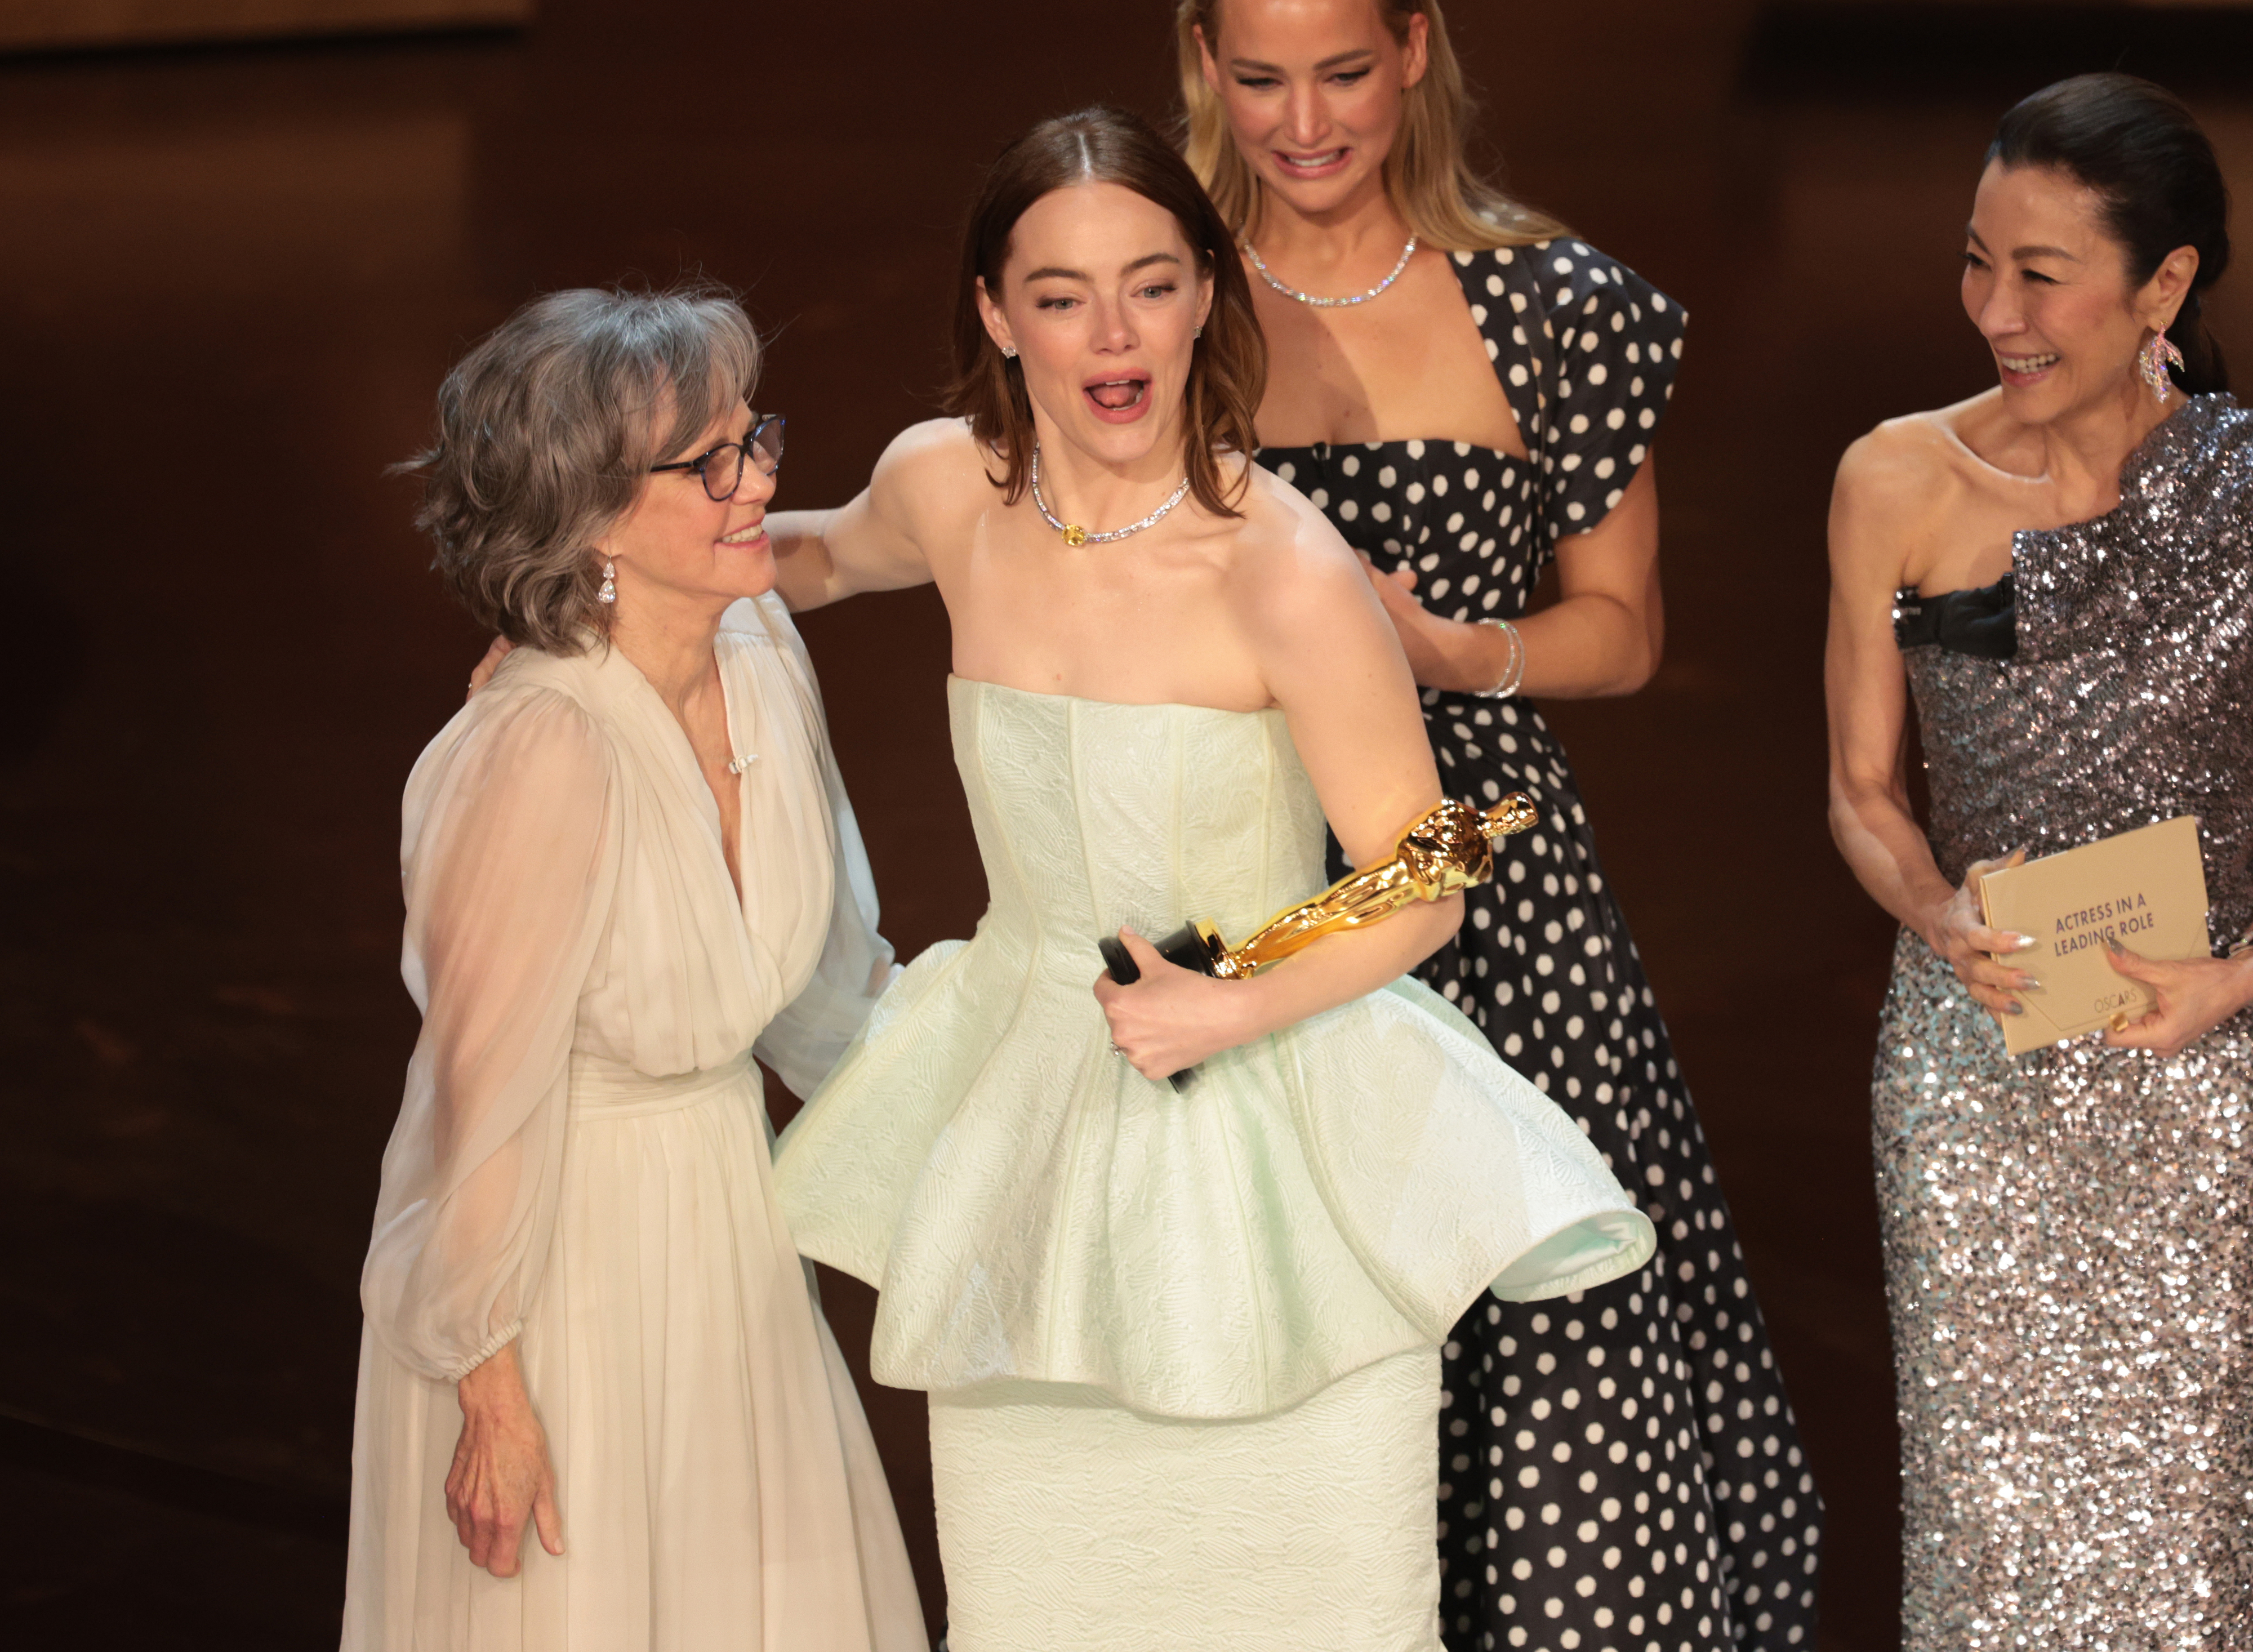 Emma Stone with her arm around Sally Field on the Oscars stage